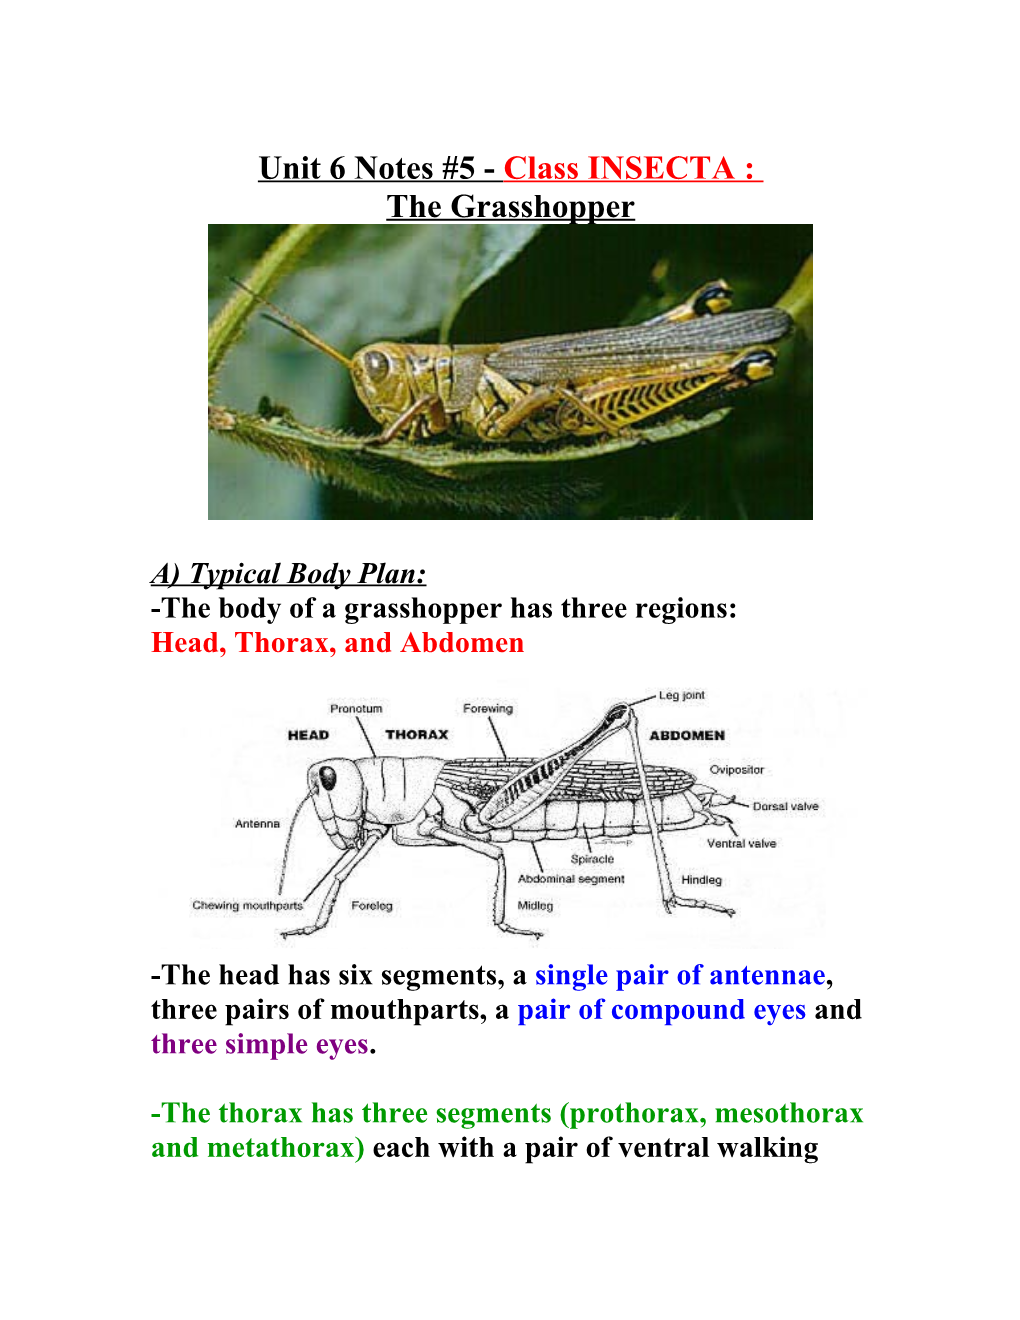 Unit 6 Notes #5 - Class INSECTA